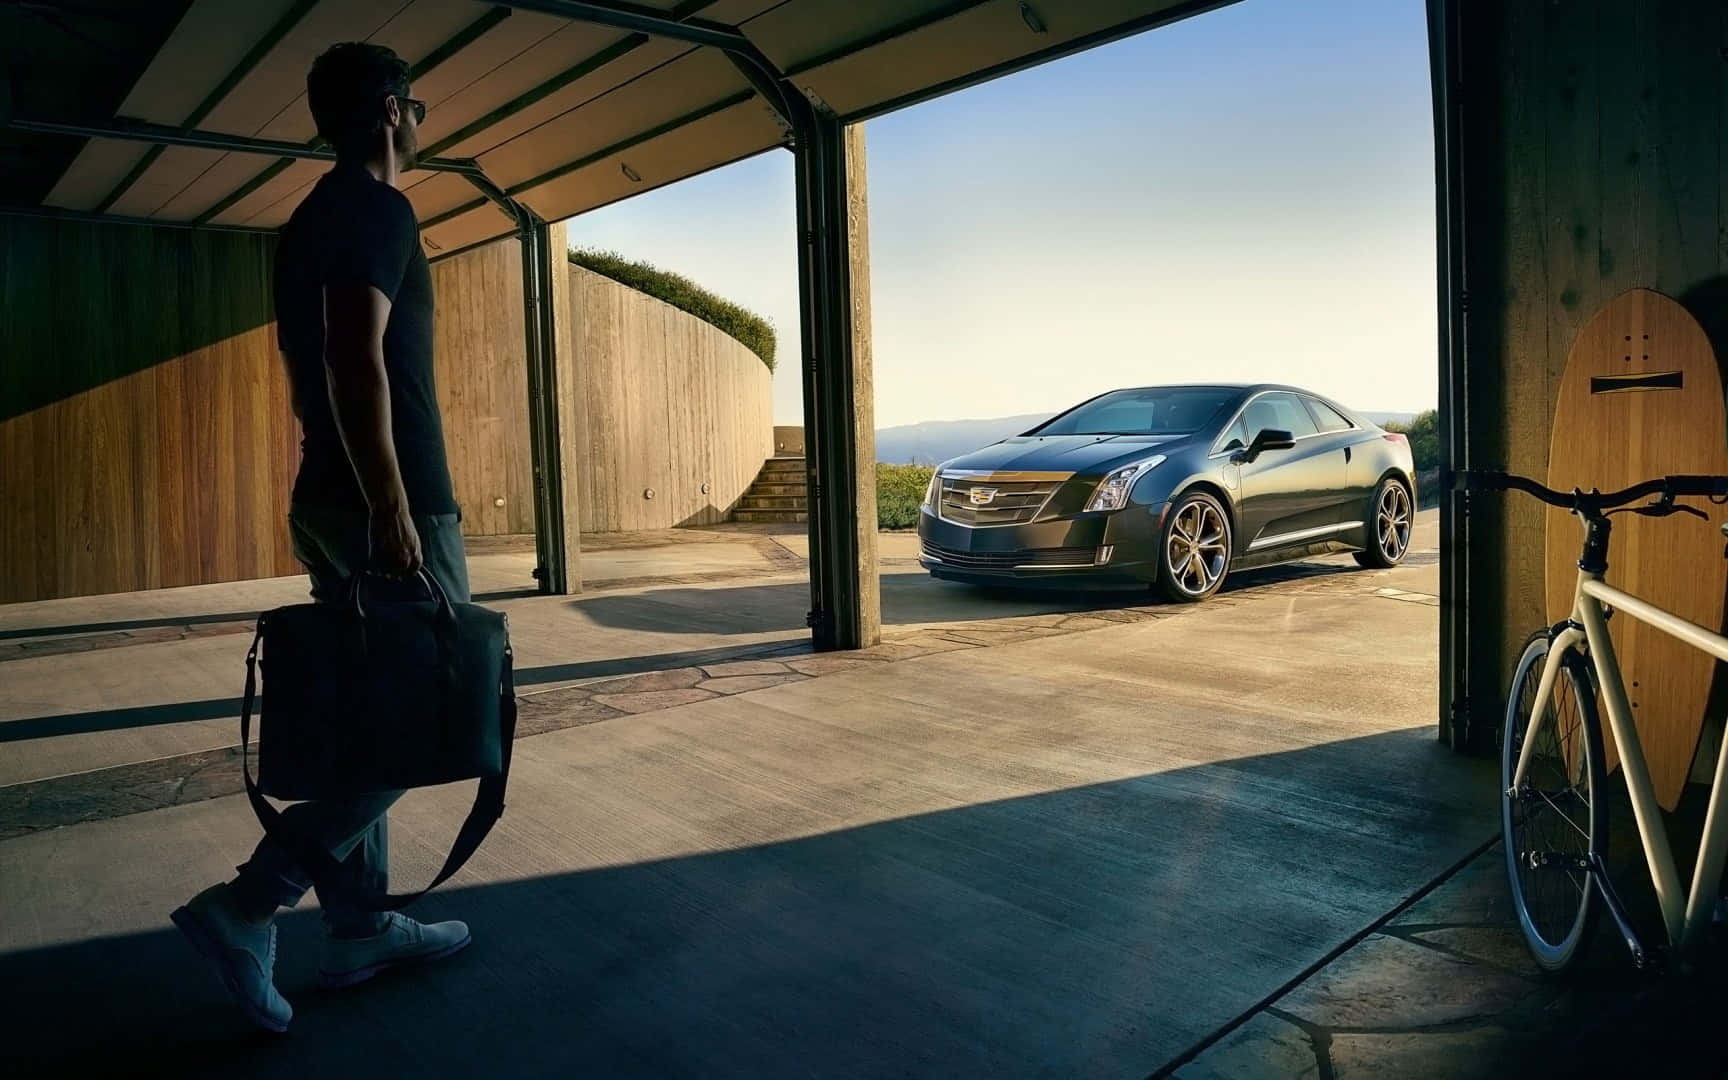 CAPTION: Stunning Cadillac ELR Hybrid Coupe Wallpaper